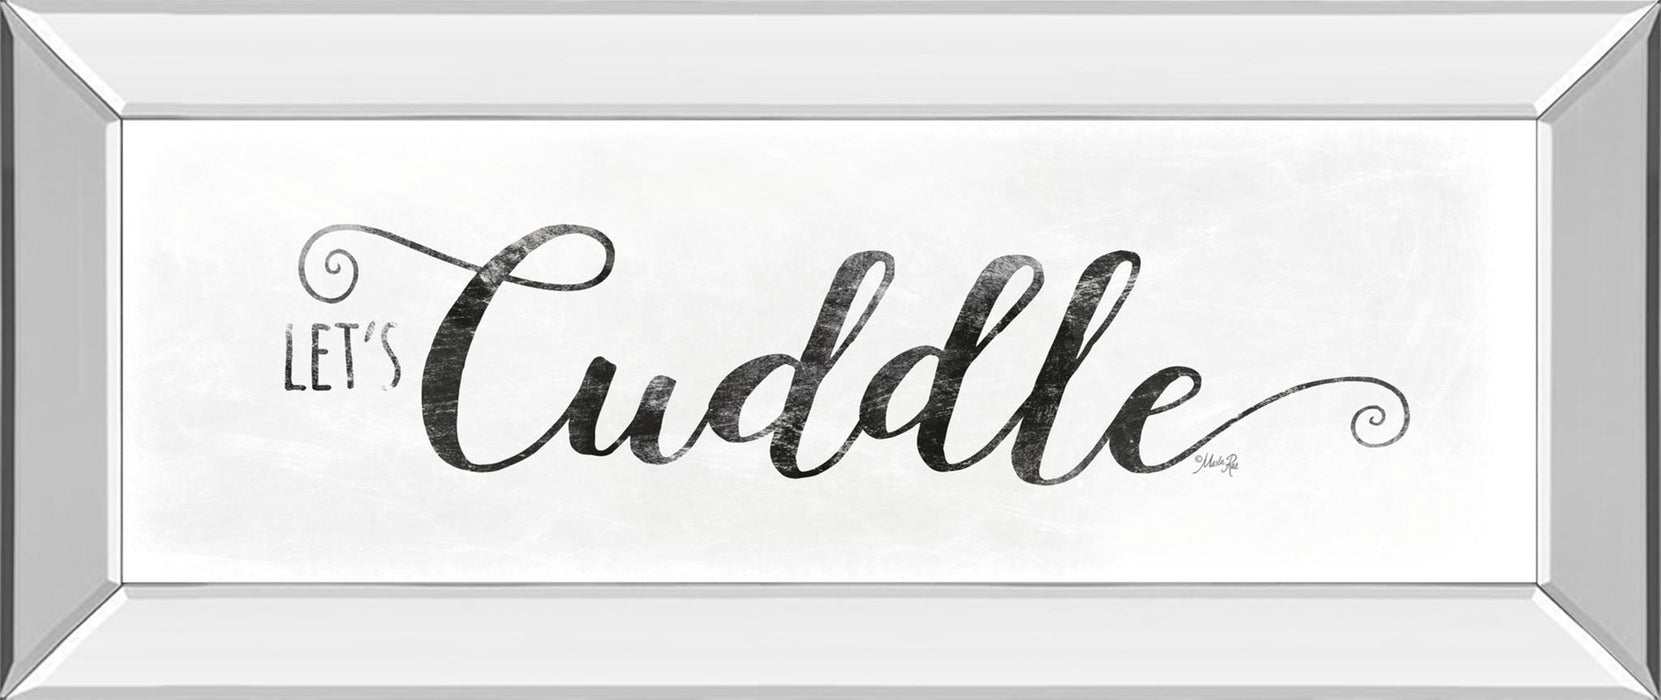 Let's Cuddle By Marla Rae - White